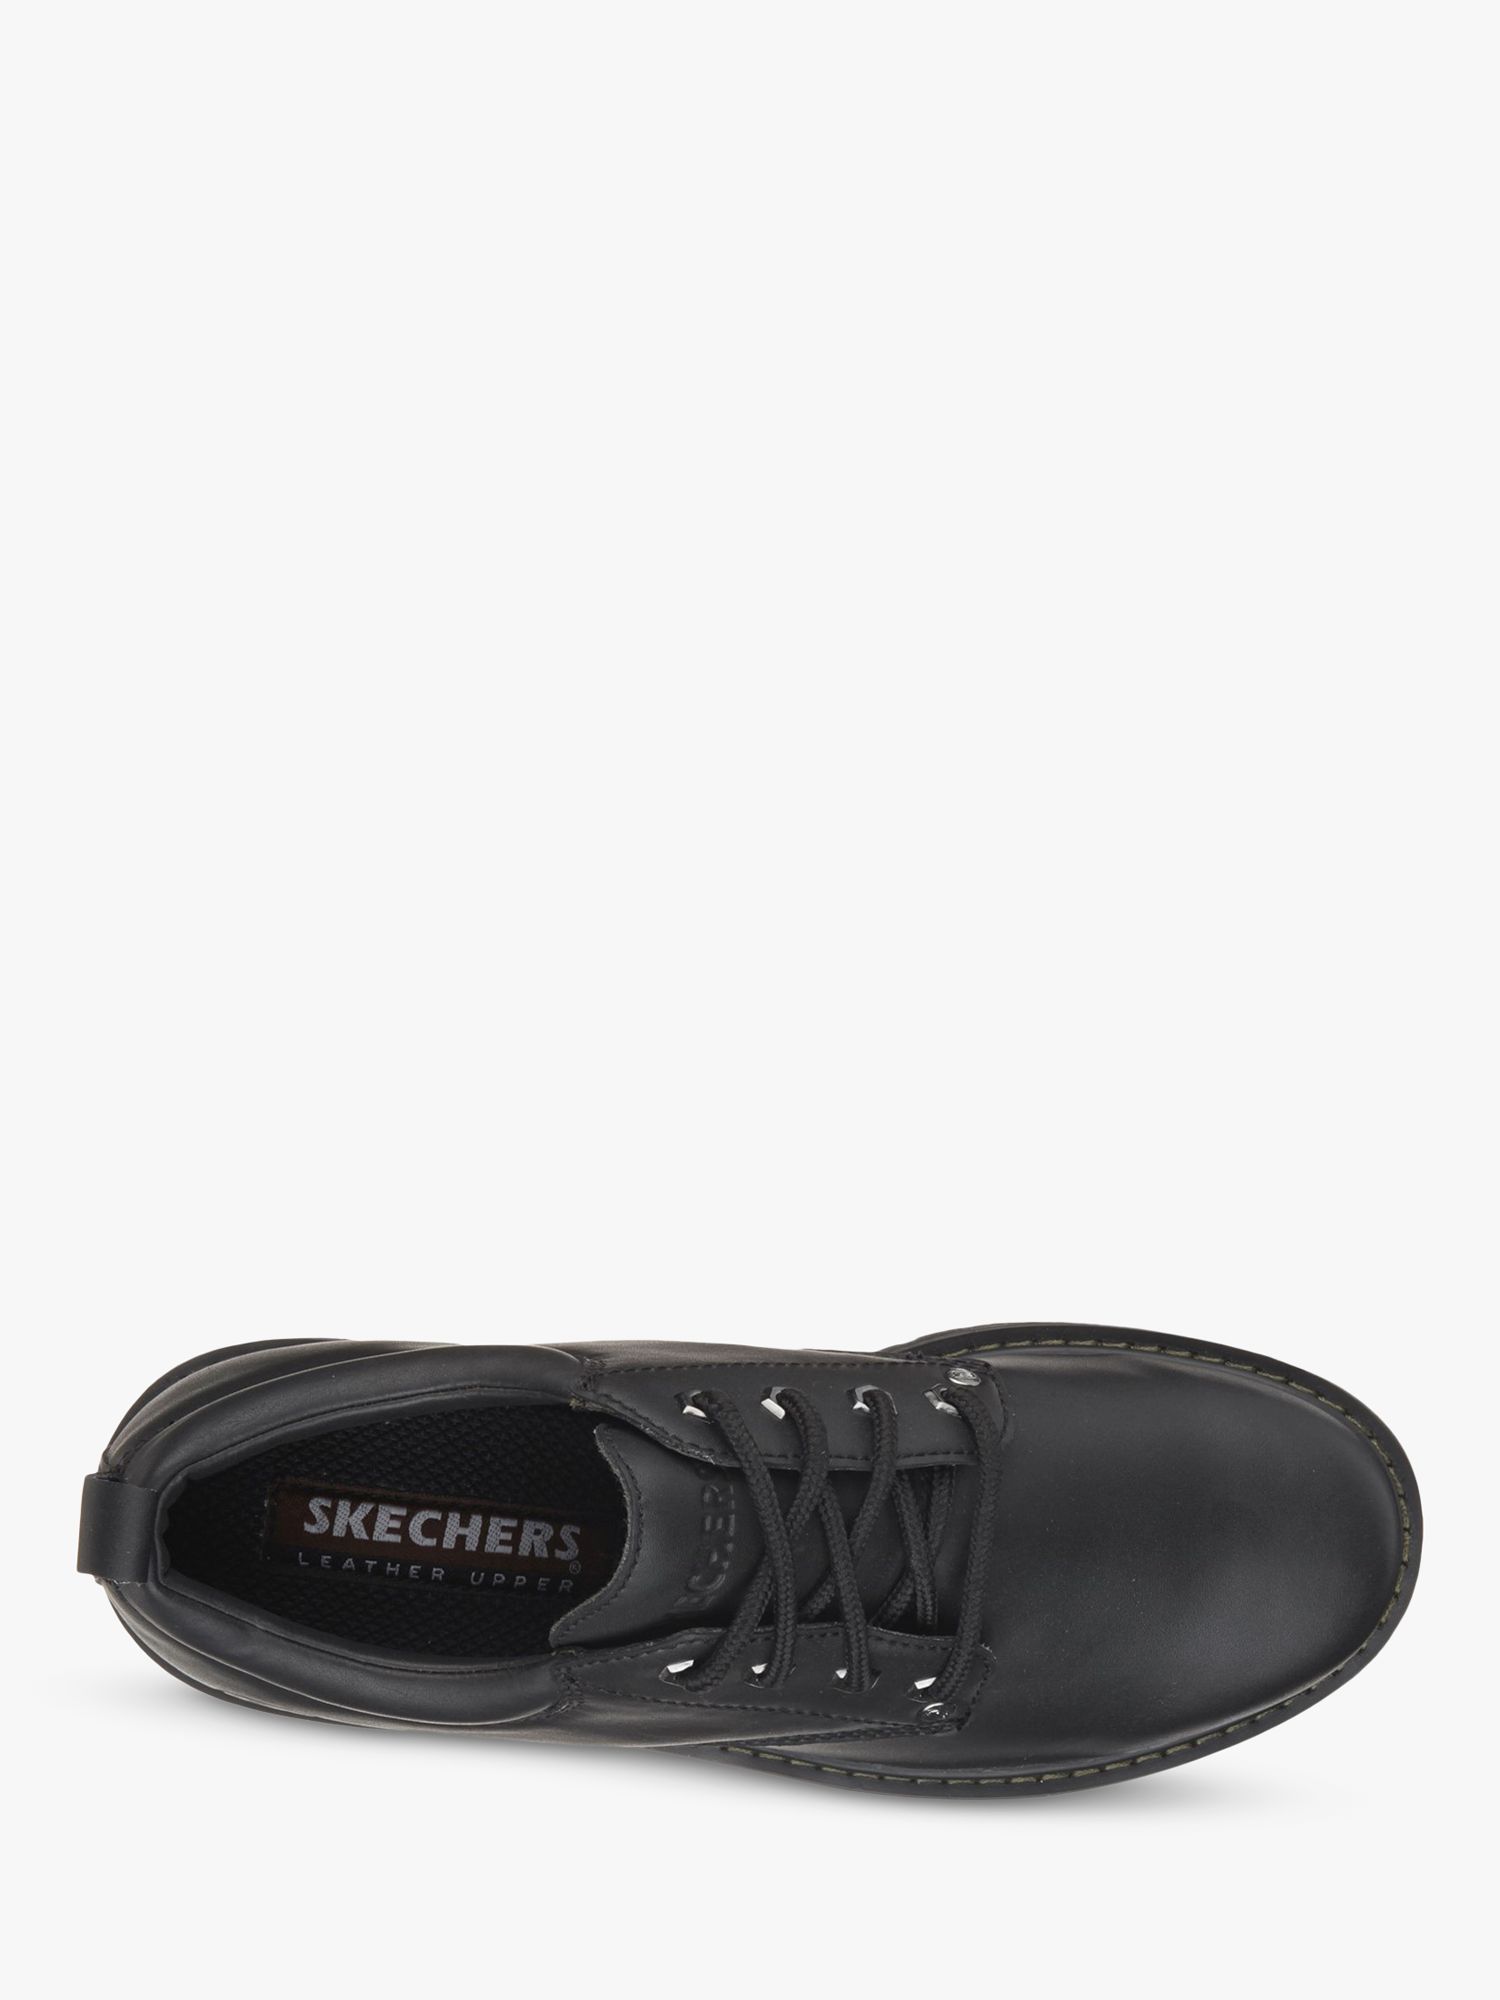 Skechers Tom Leather Lace Up Oxford at Lewis & Partners